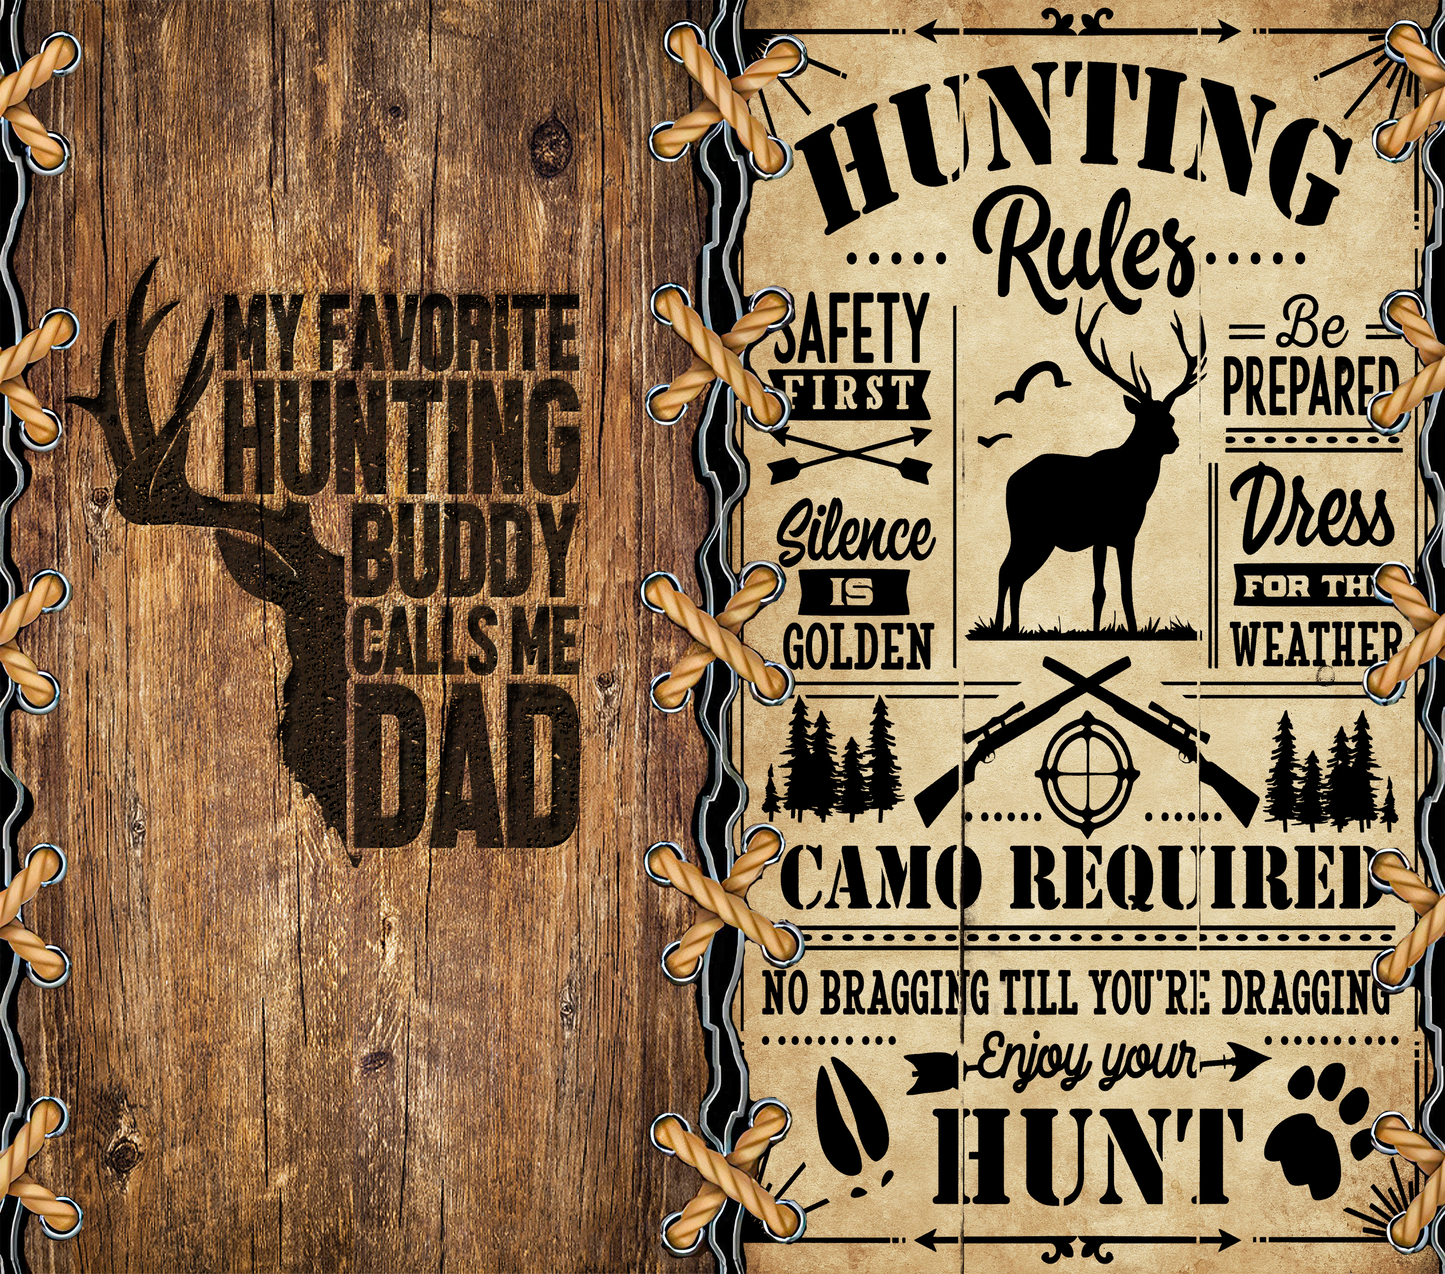 Hunting rules